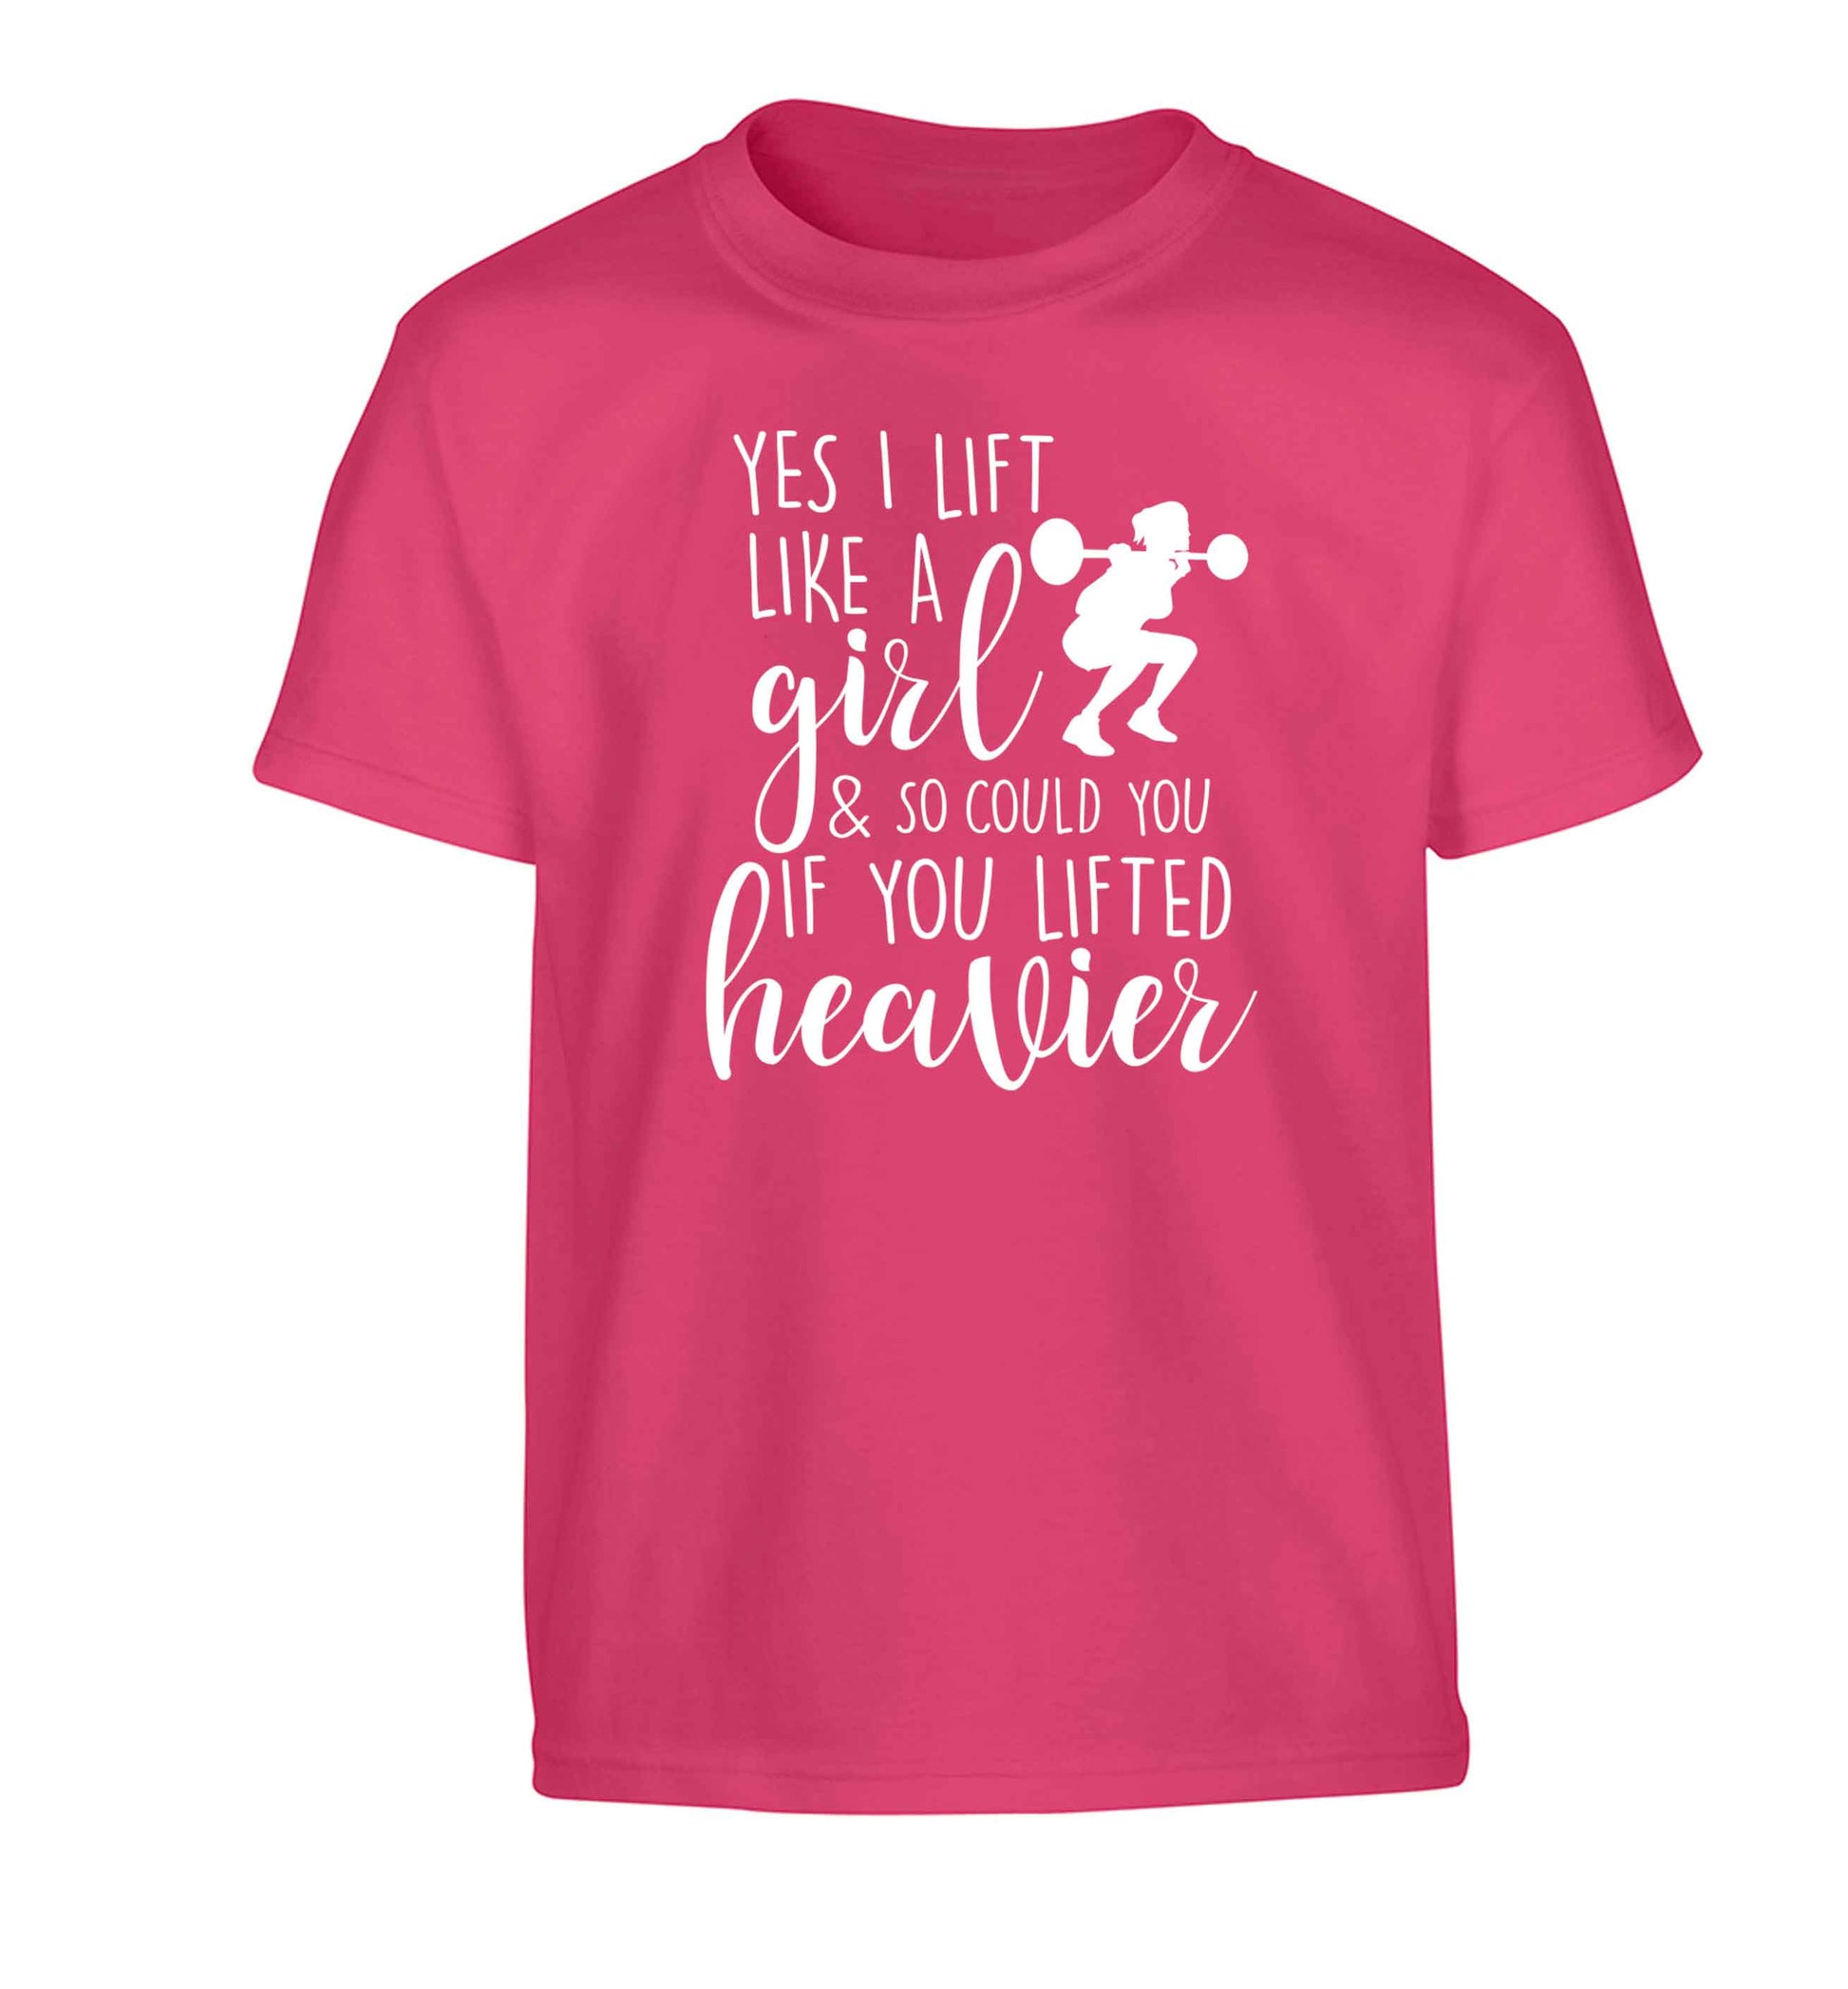 Yes I lift like a girl and so could you if you lifted heavier Children's pink Tshirt 12-13 Years